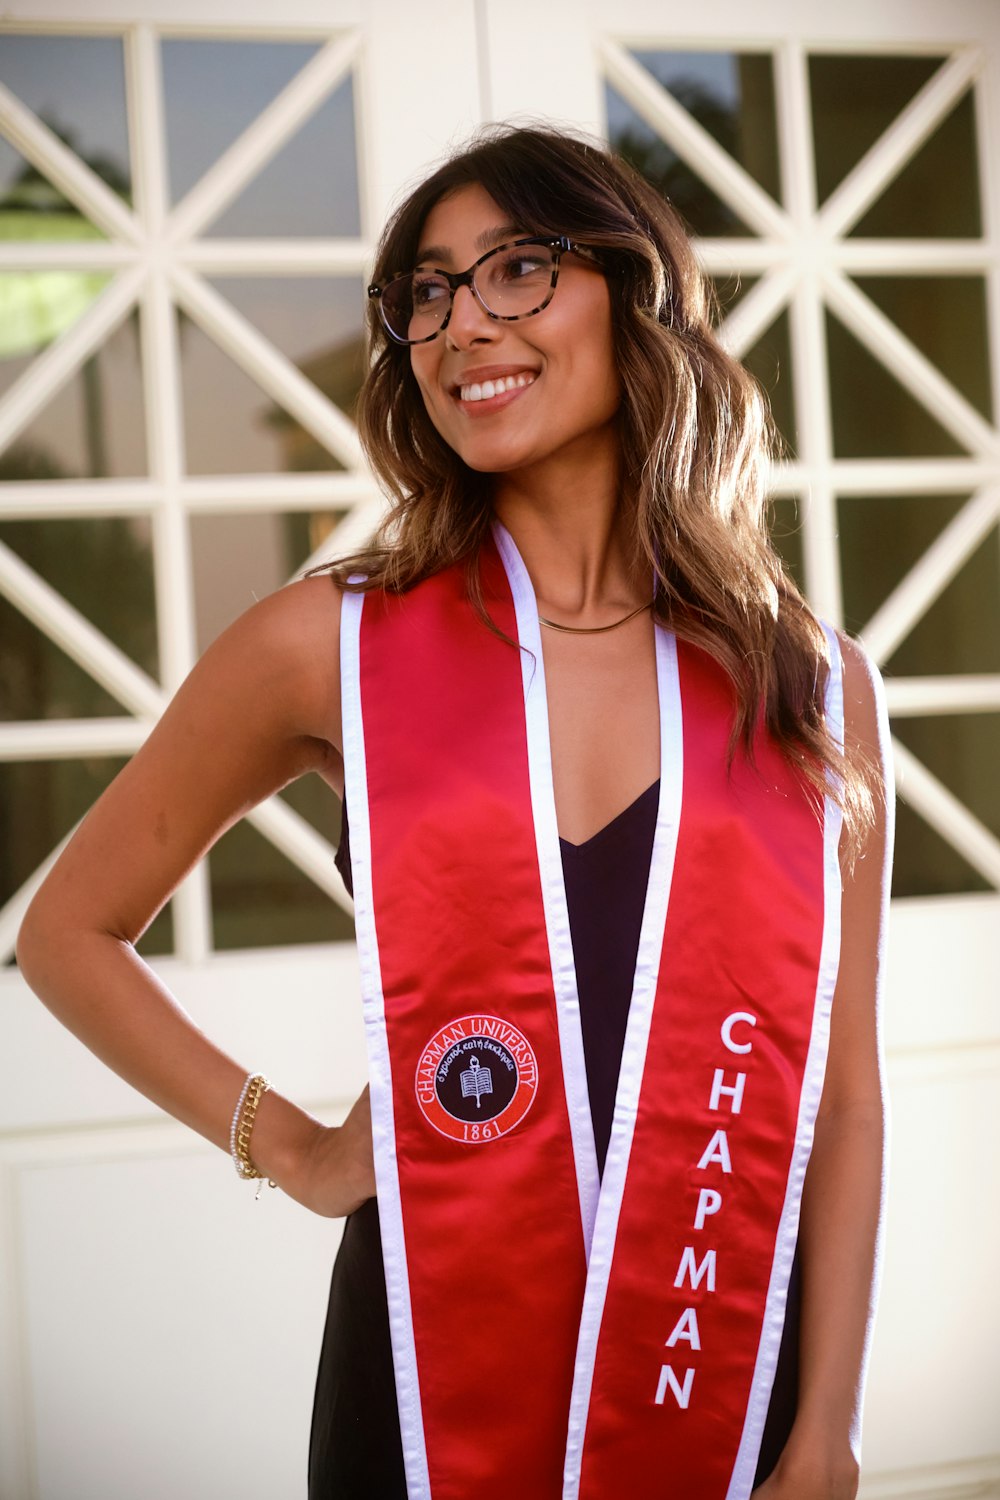 a woman wearing a red sash and glasses